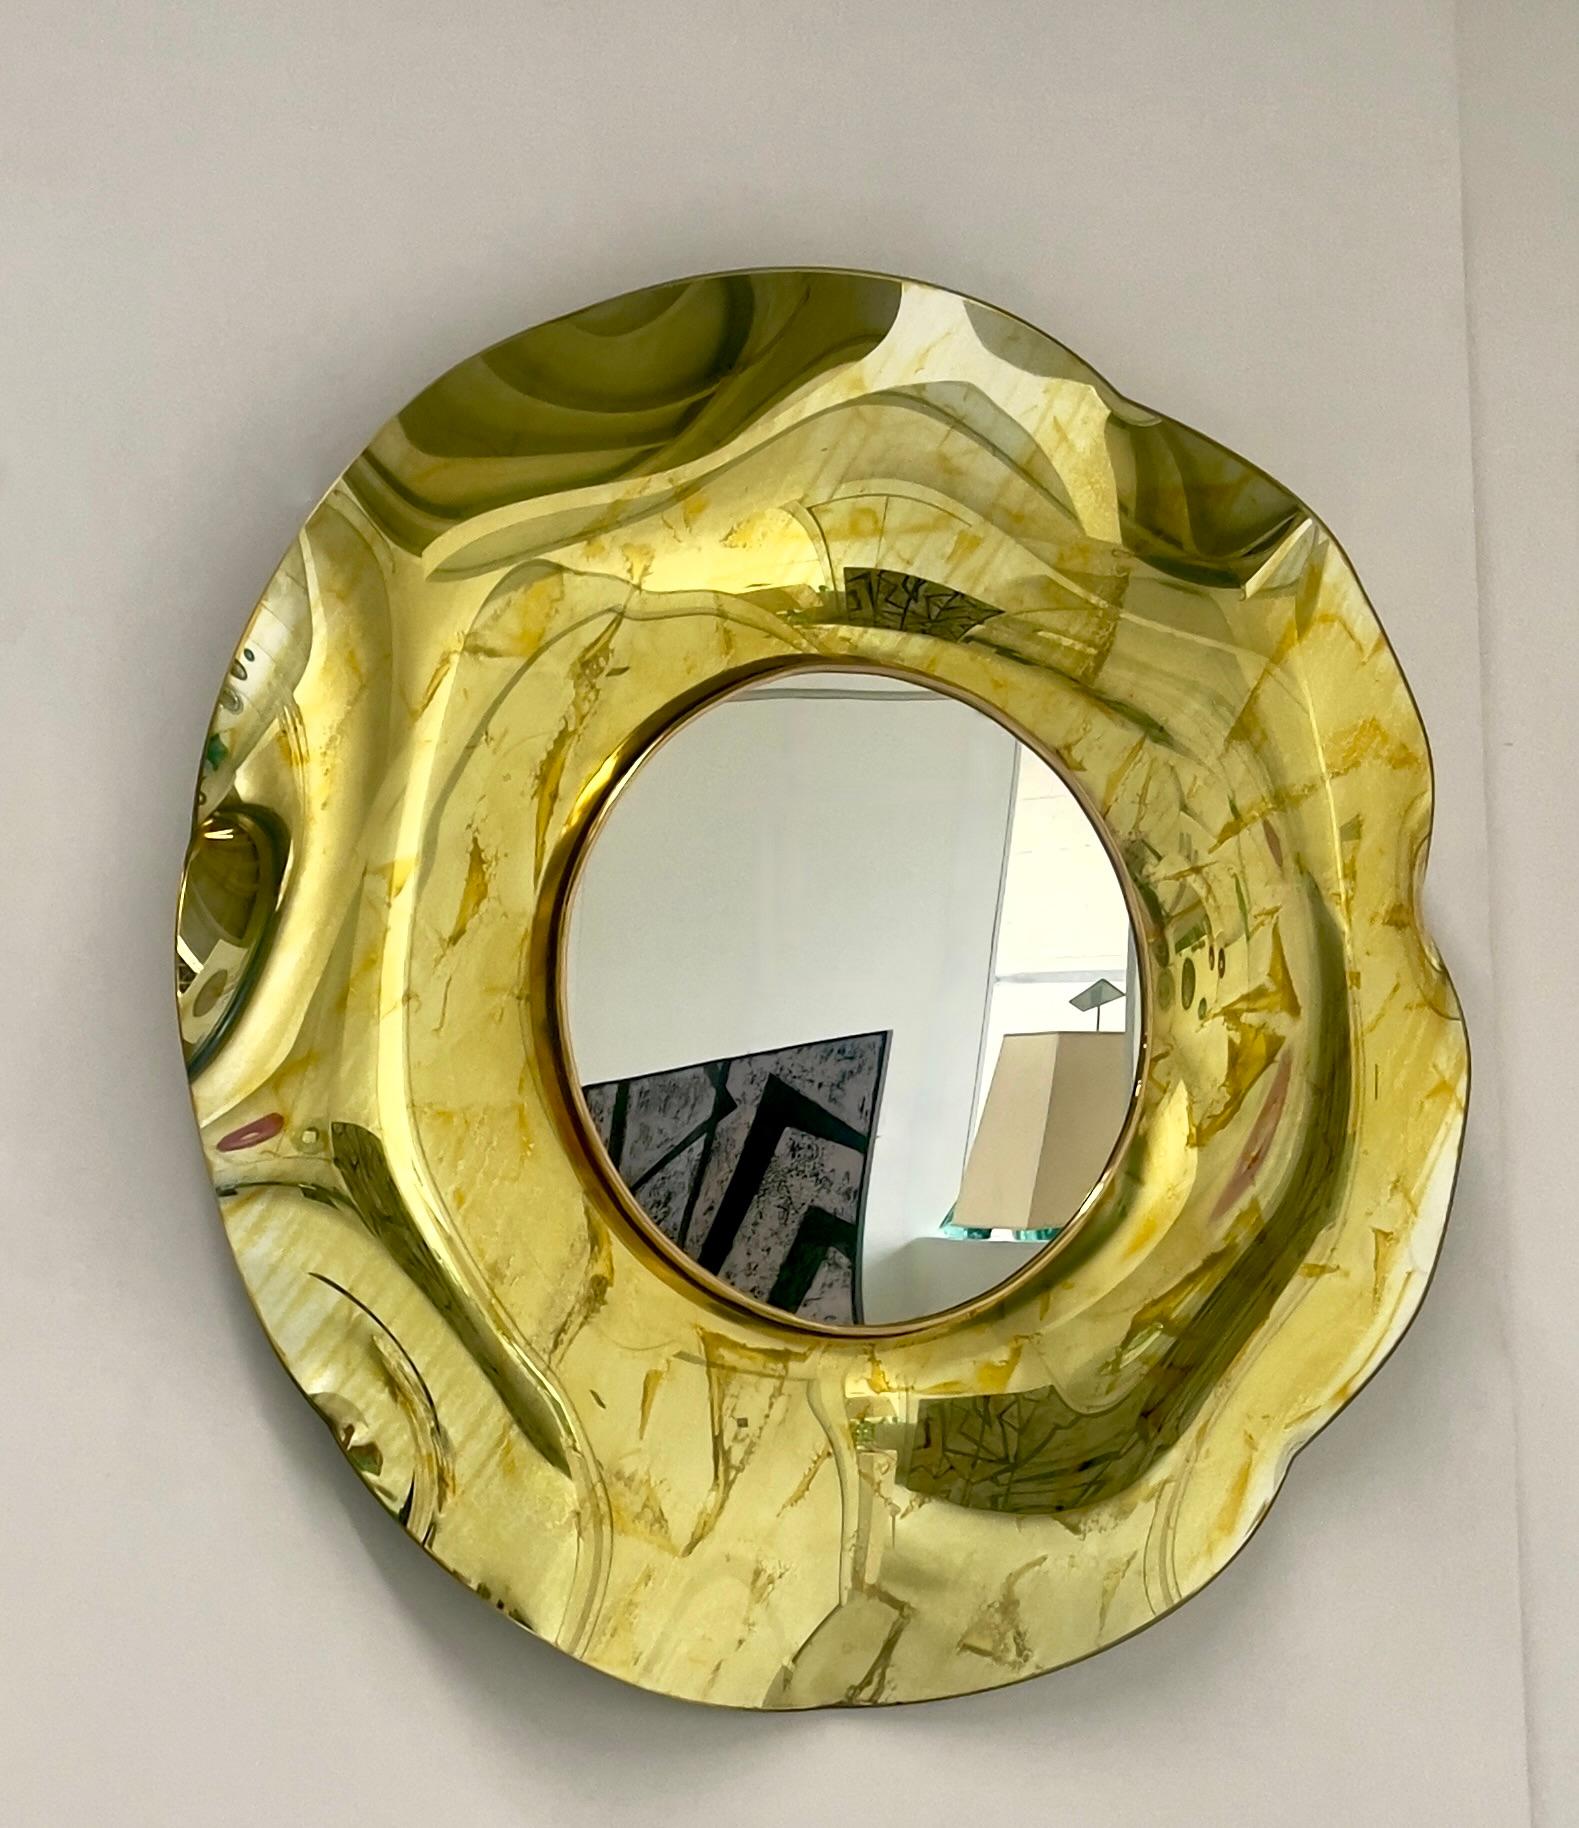 Contemporary 'Undulate' Handmade Gold Crystal Mirror Dia. 40'' by Ghiró Studio For Sale 7